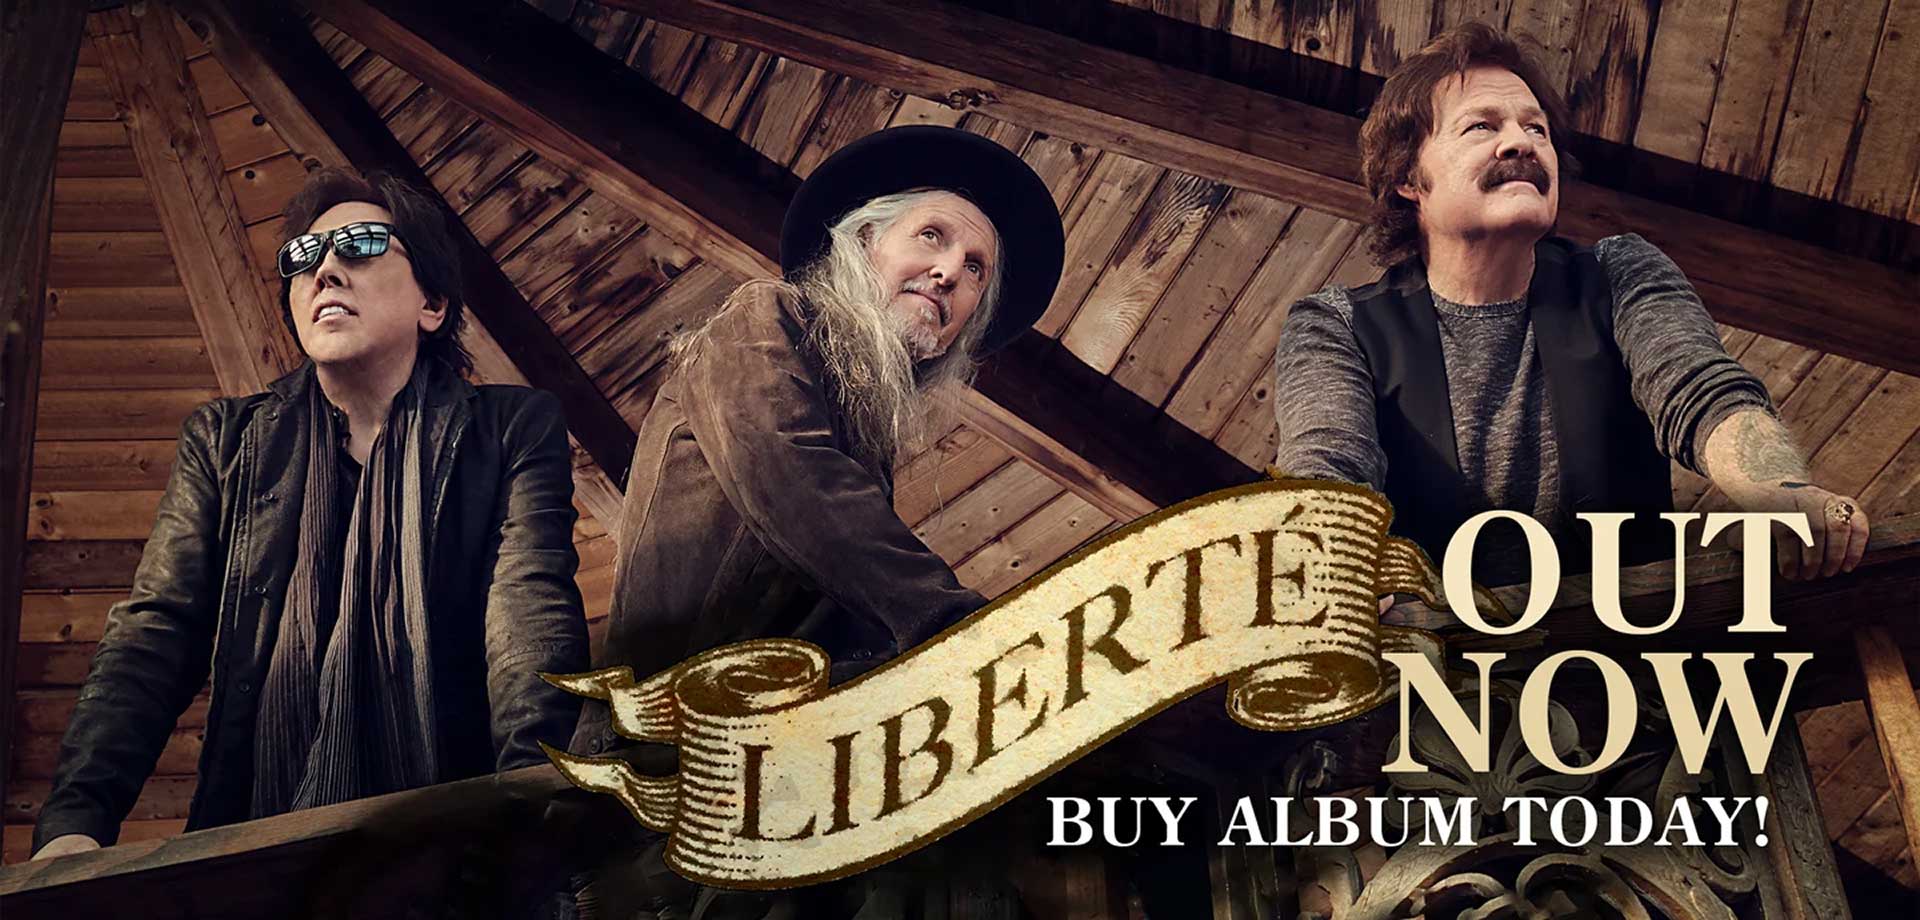 Liberte Out Now - Buy Album Today!